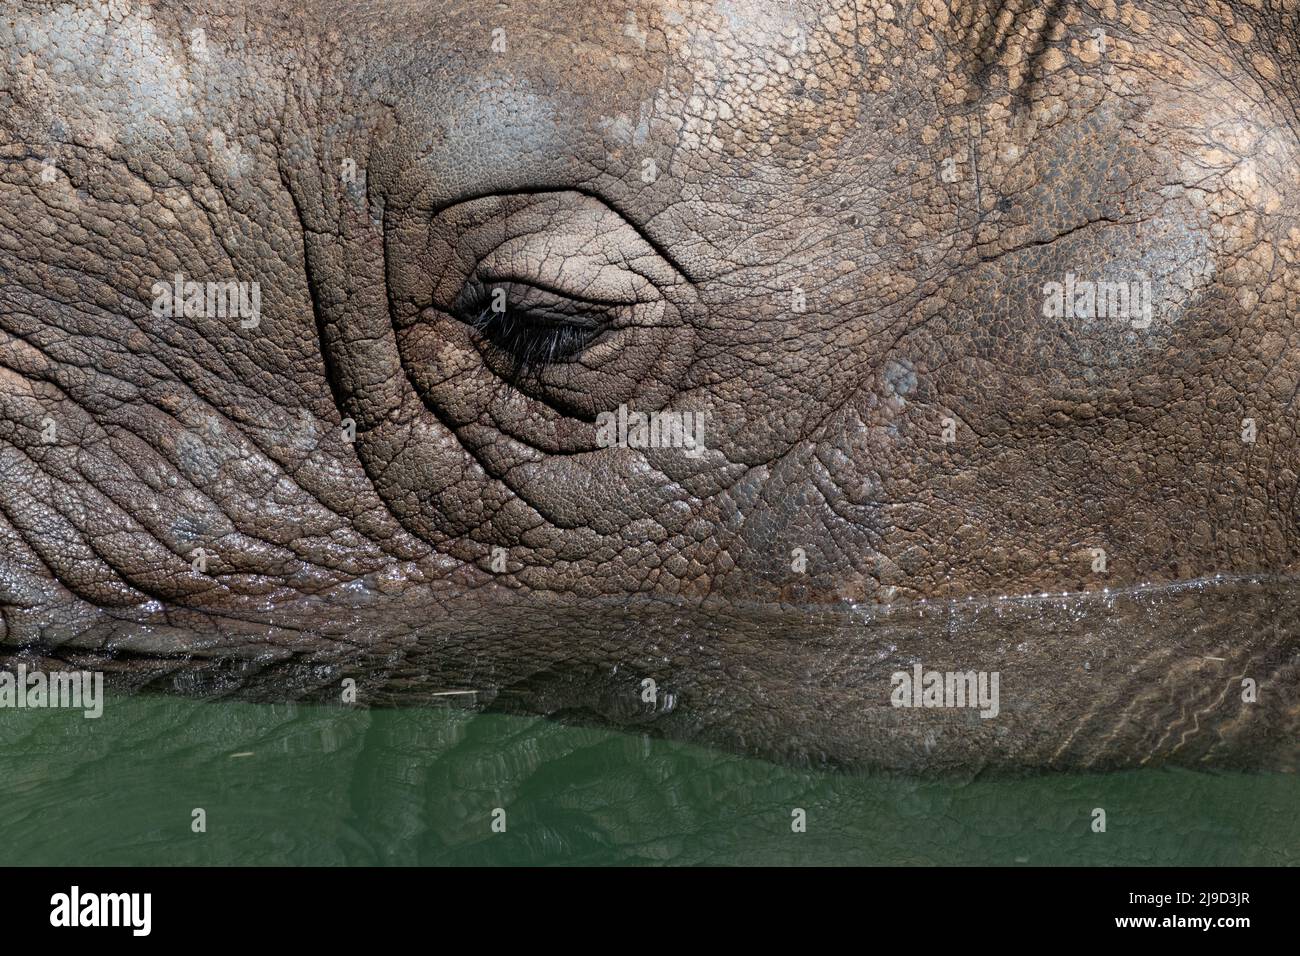 Closeup side profile of the cheek and gentle eye of a Rhinoceros showing the wrinkled texture of its skin as if relaxes and cools off in the water. Stock Photo